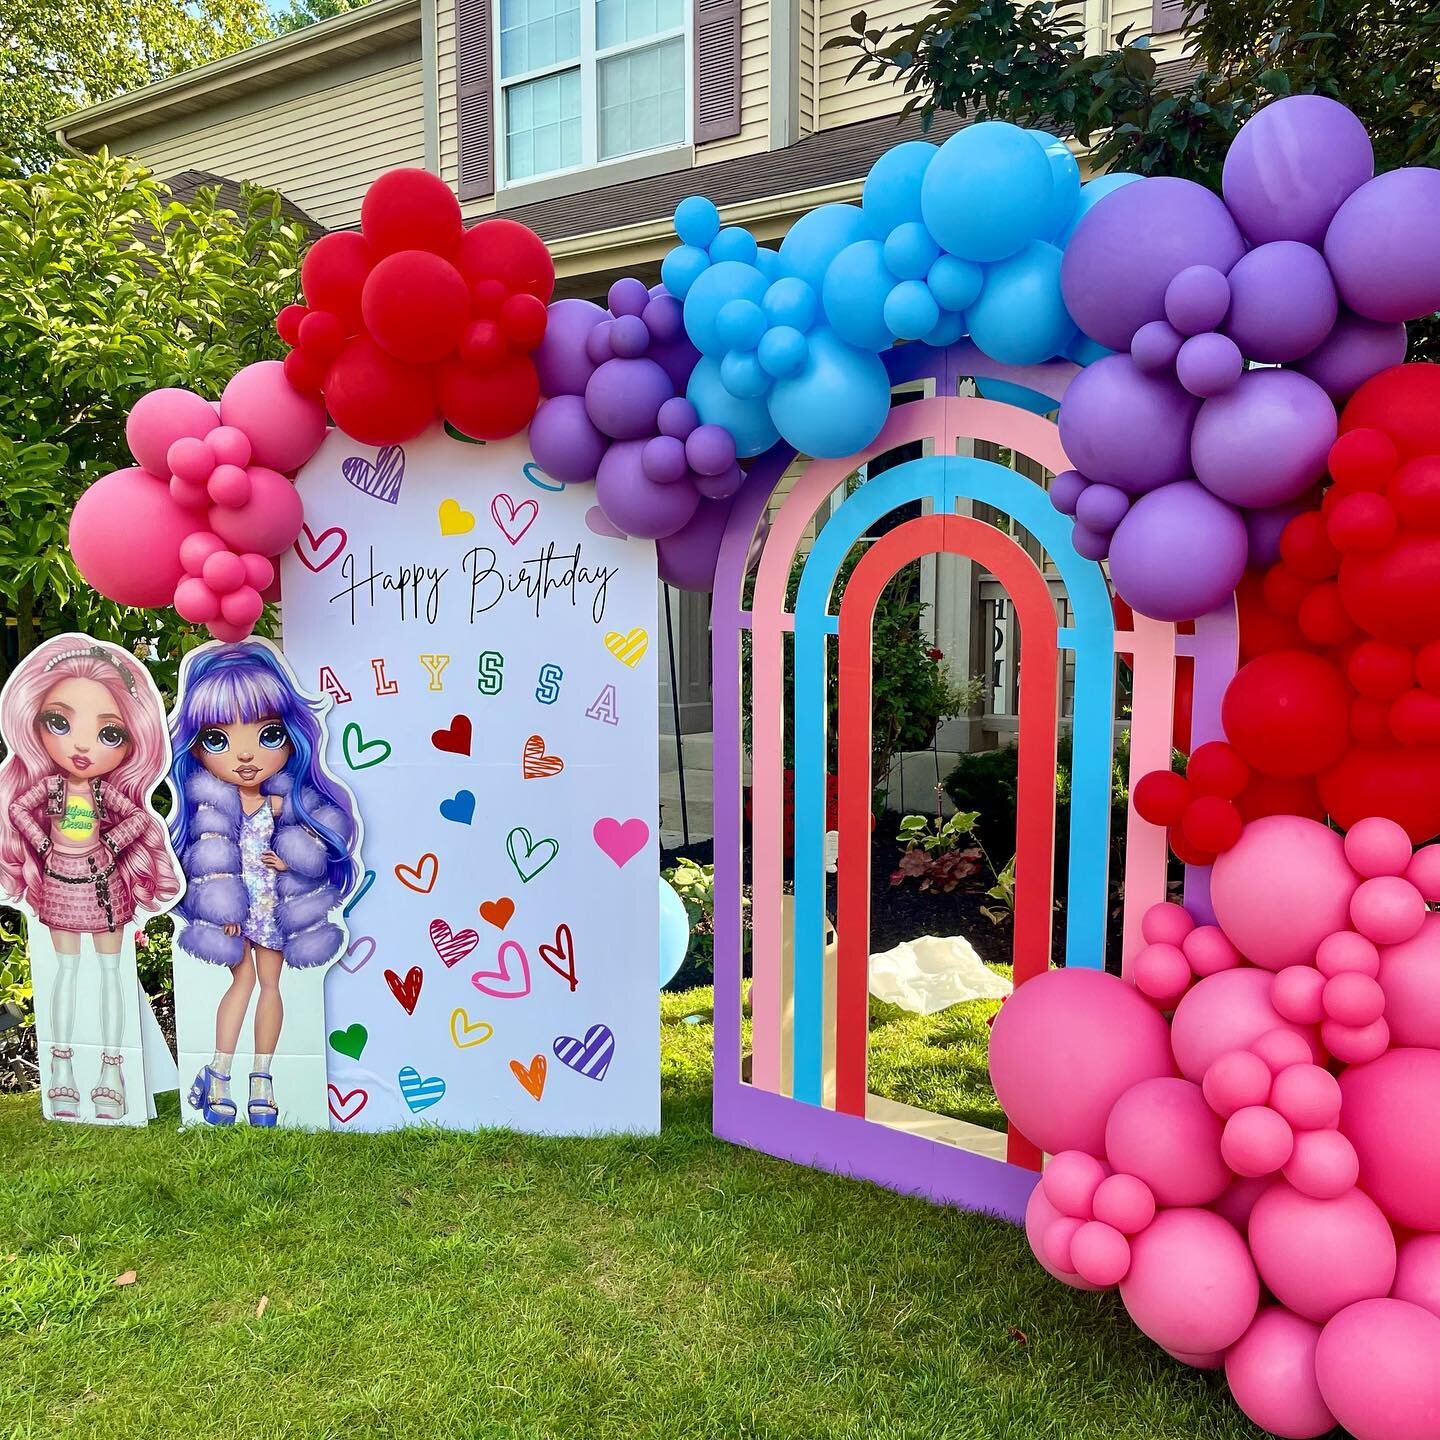 Todays &ldquo;Rainbow High&rdquo; themed 9th birthday party! Custom vinyl decals, custom character cutouts, extra large garland, rainbow backdrop, and regular chiara backdrop. 
&bull;
&bull;
&bull;
&bull;
&bull;
#chicagoeventplanner #chicsgoeventdesi